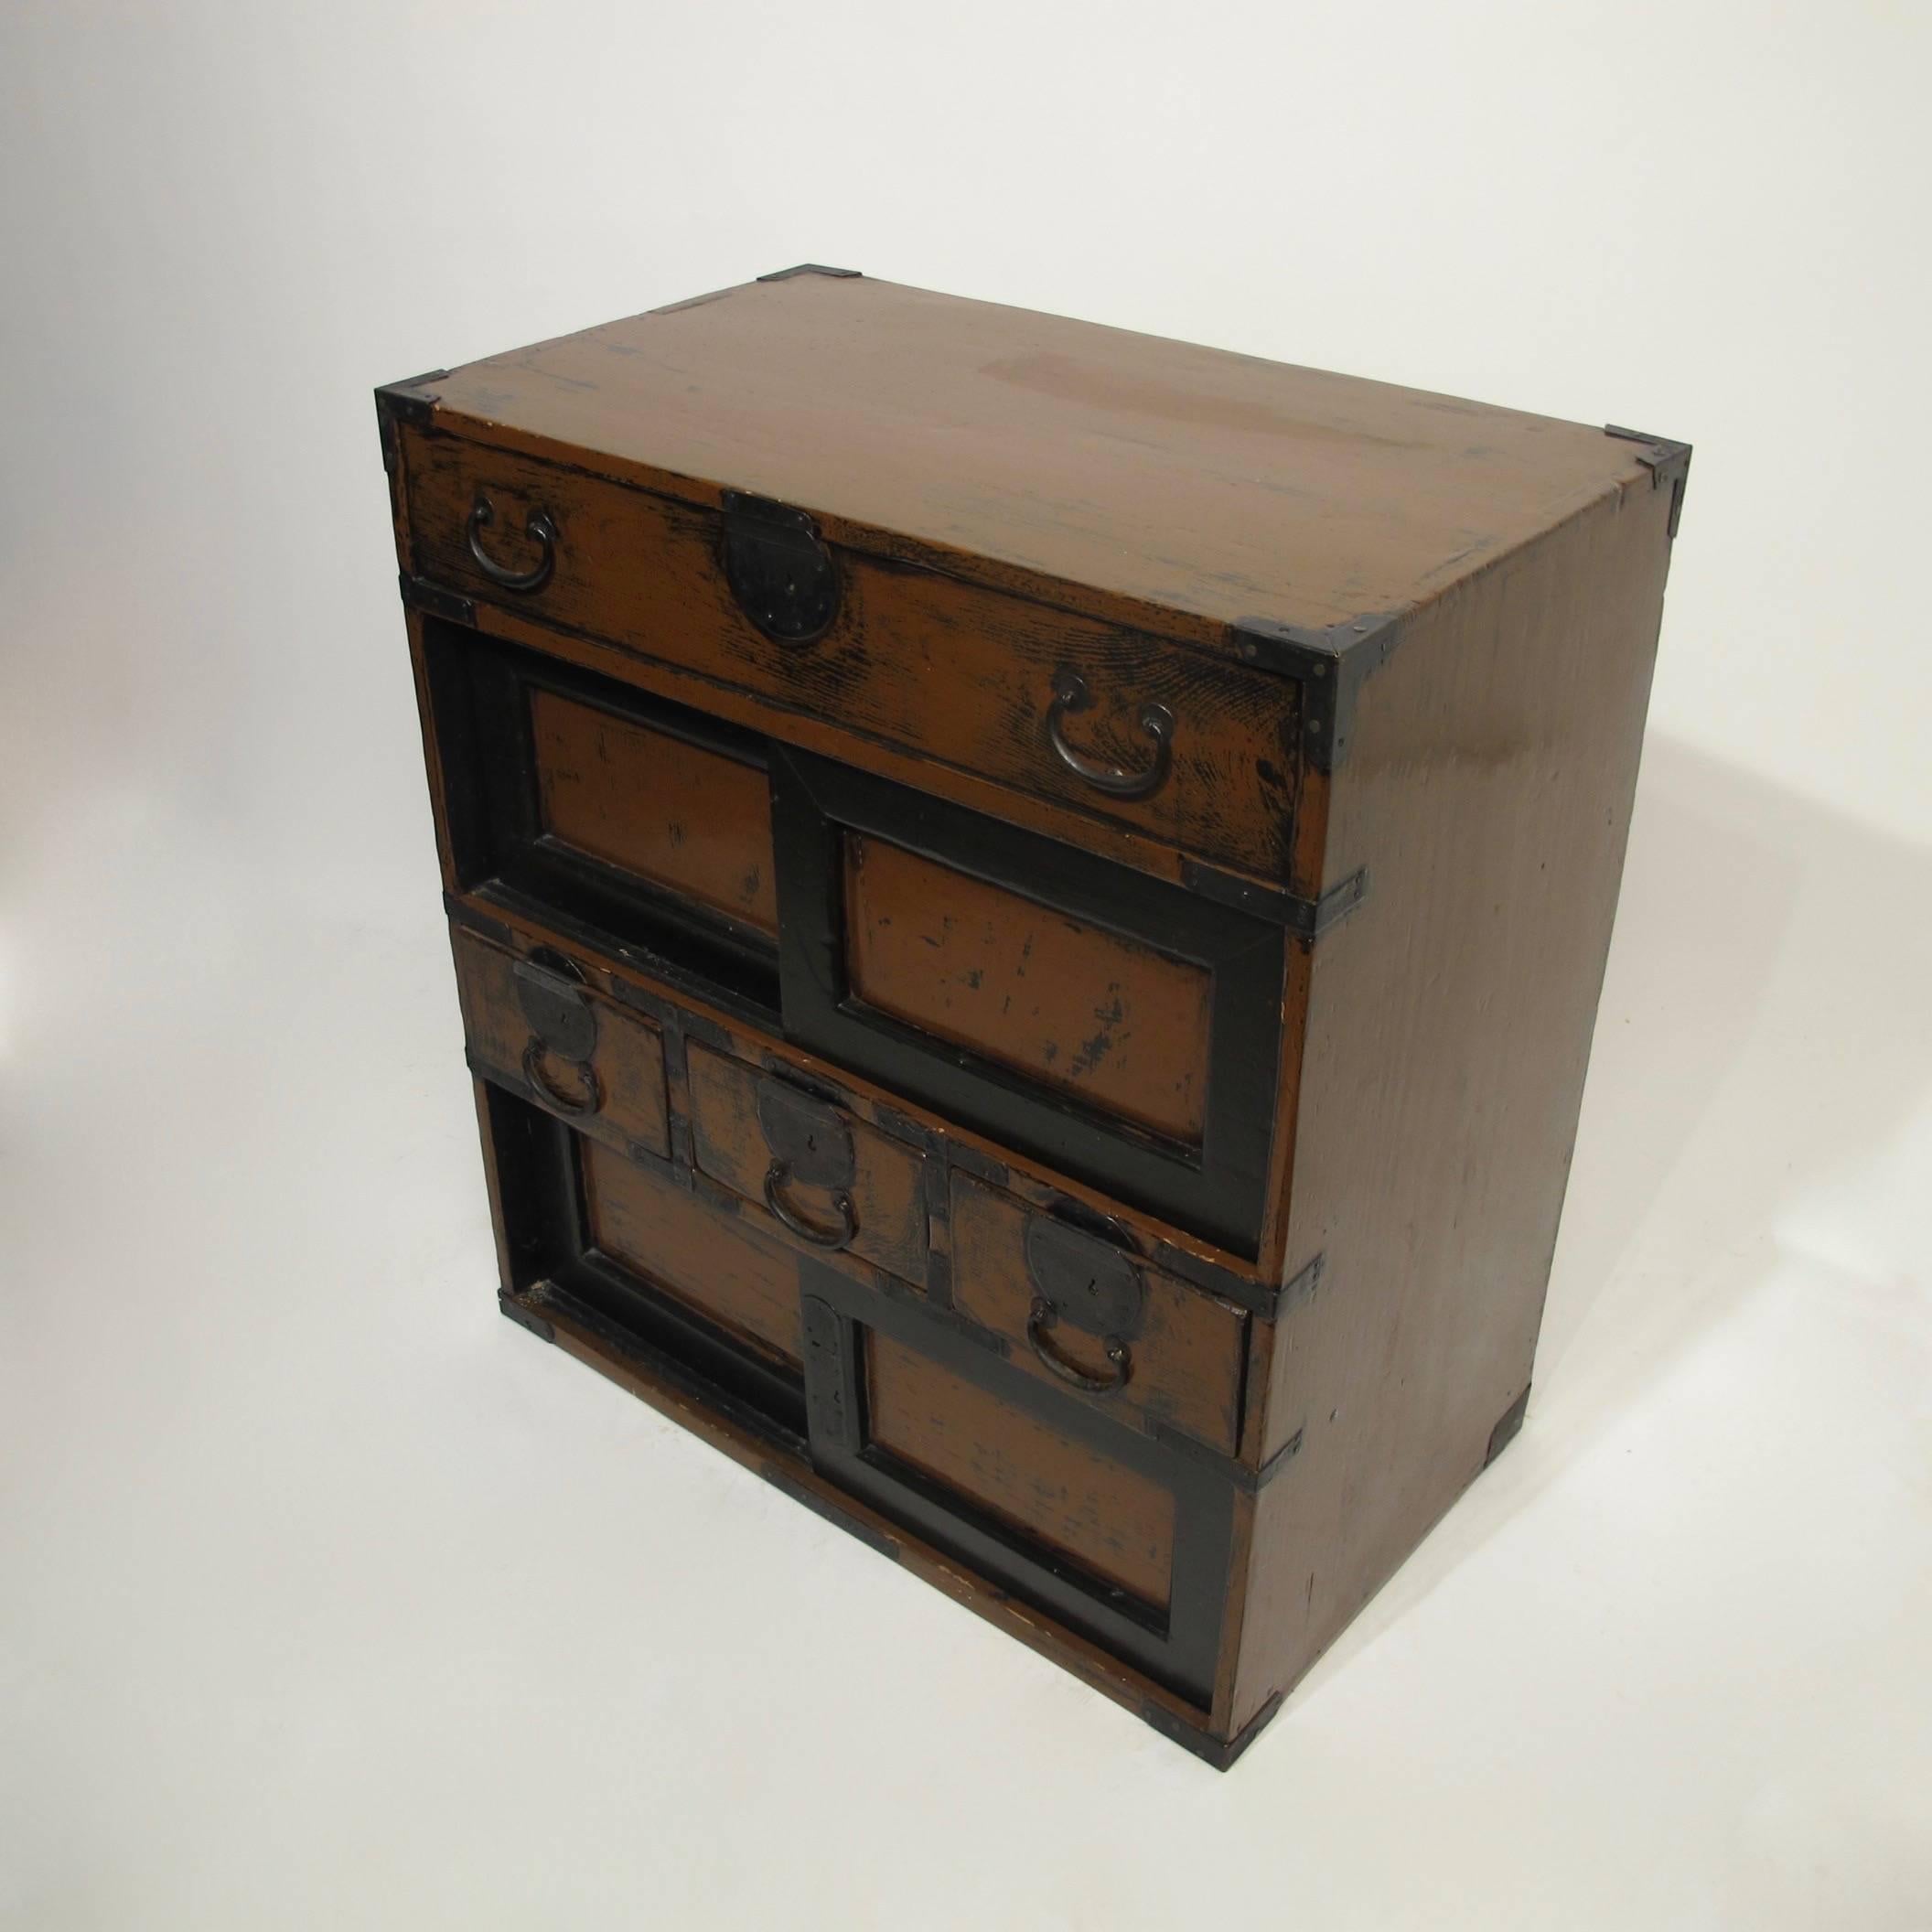 An unusual small size multi drawer tansu or chest with original iron hardware, Japan, late 19th-early 20th century.